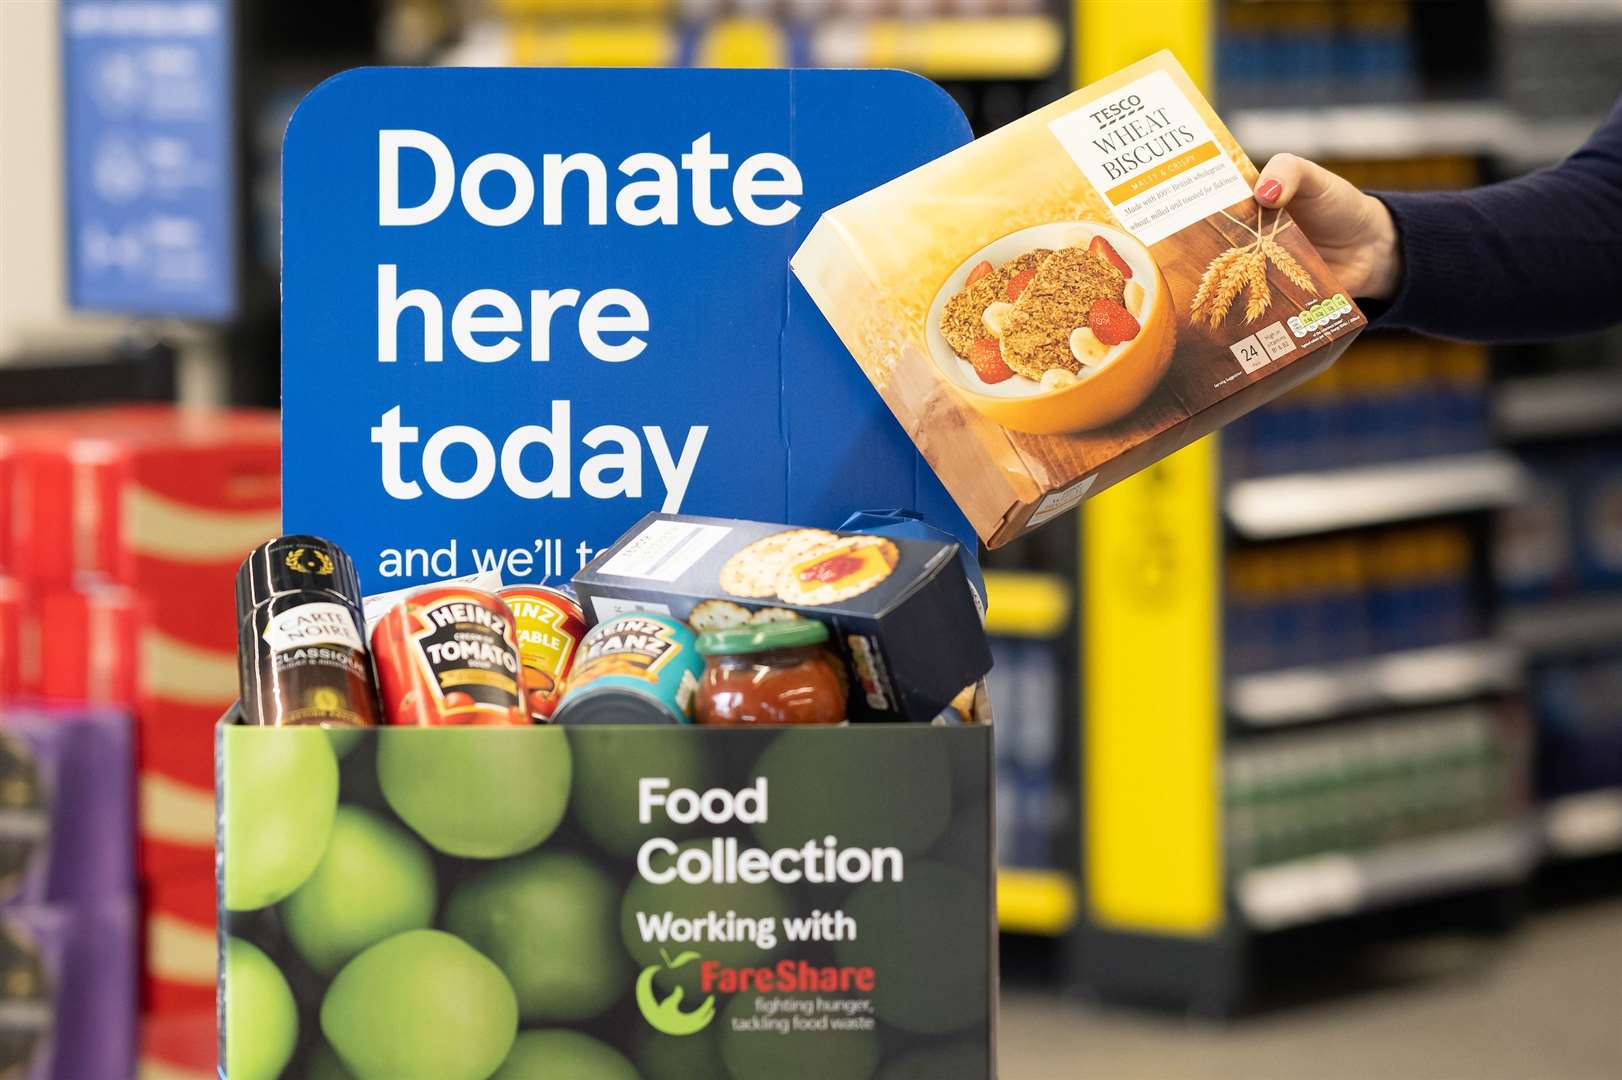 Food donation event taking place at Tesco's bigger stores